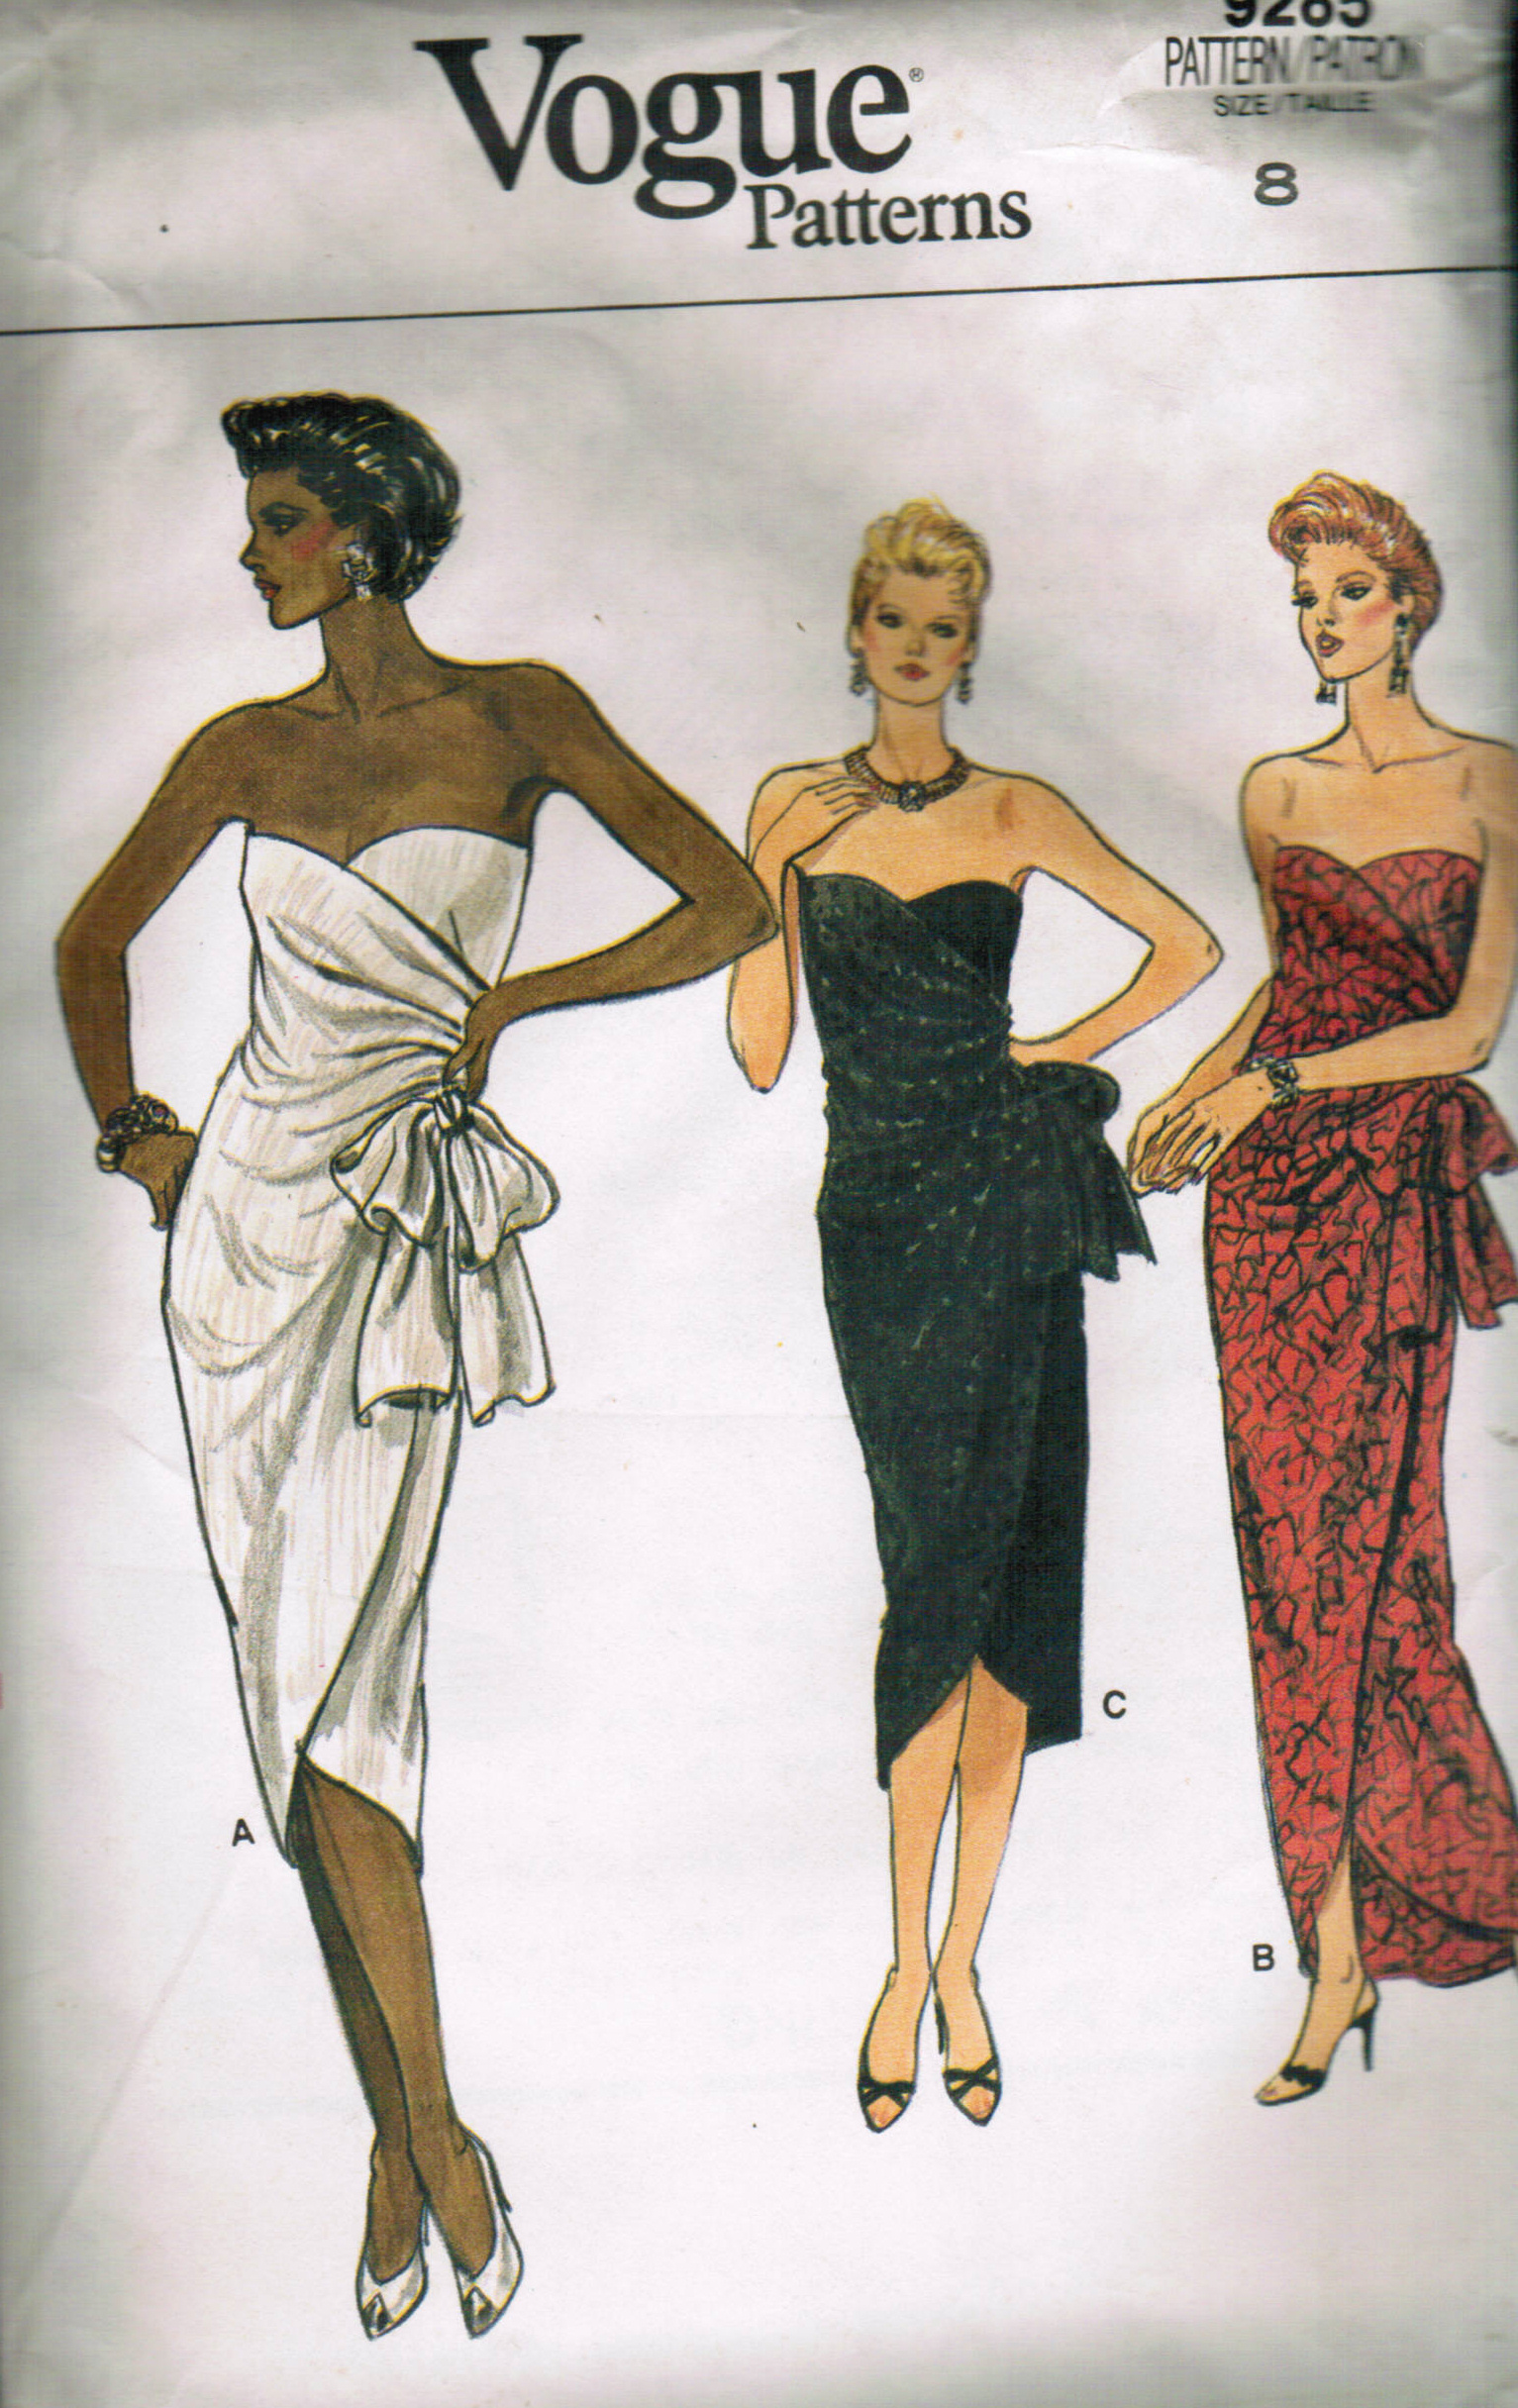 Vogue 9285 | Vintage Sewing Patterns | FANDOM powered by Wikia